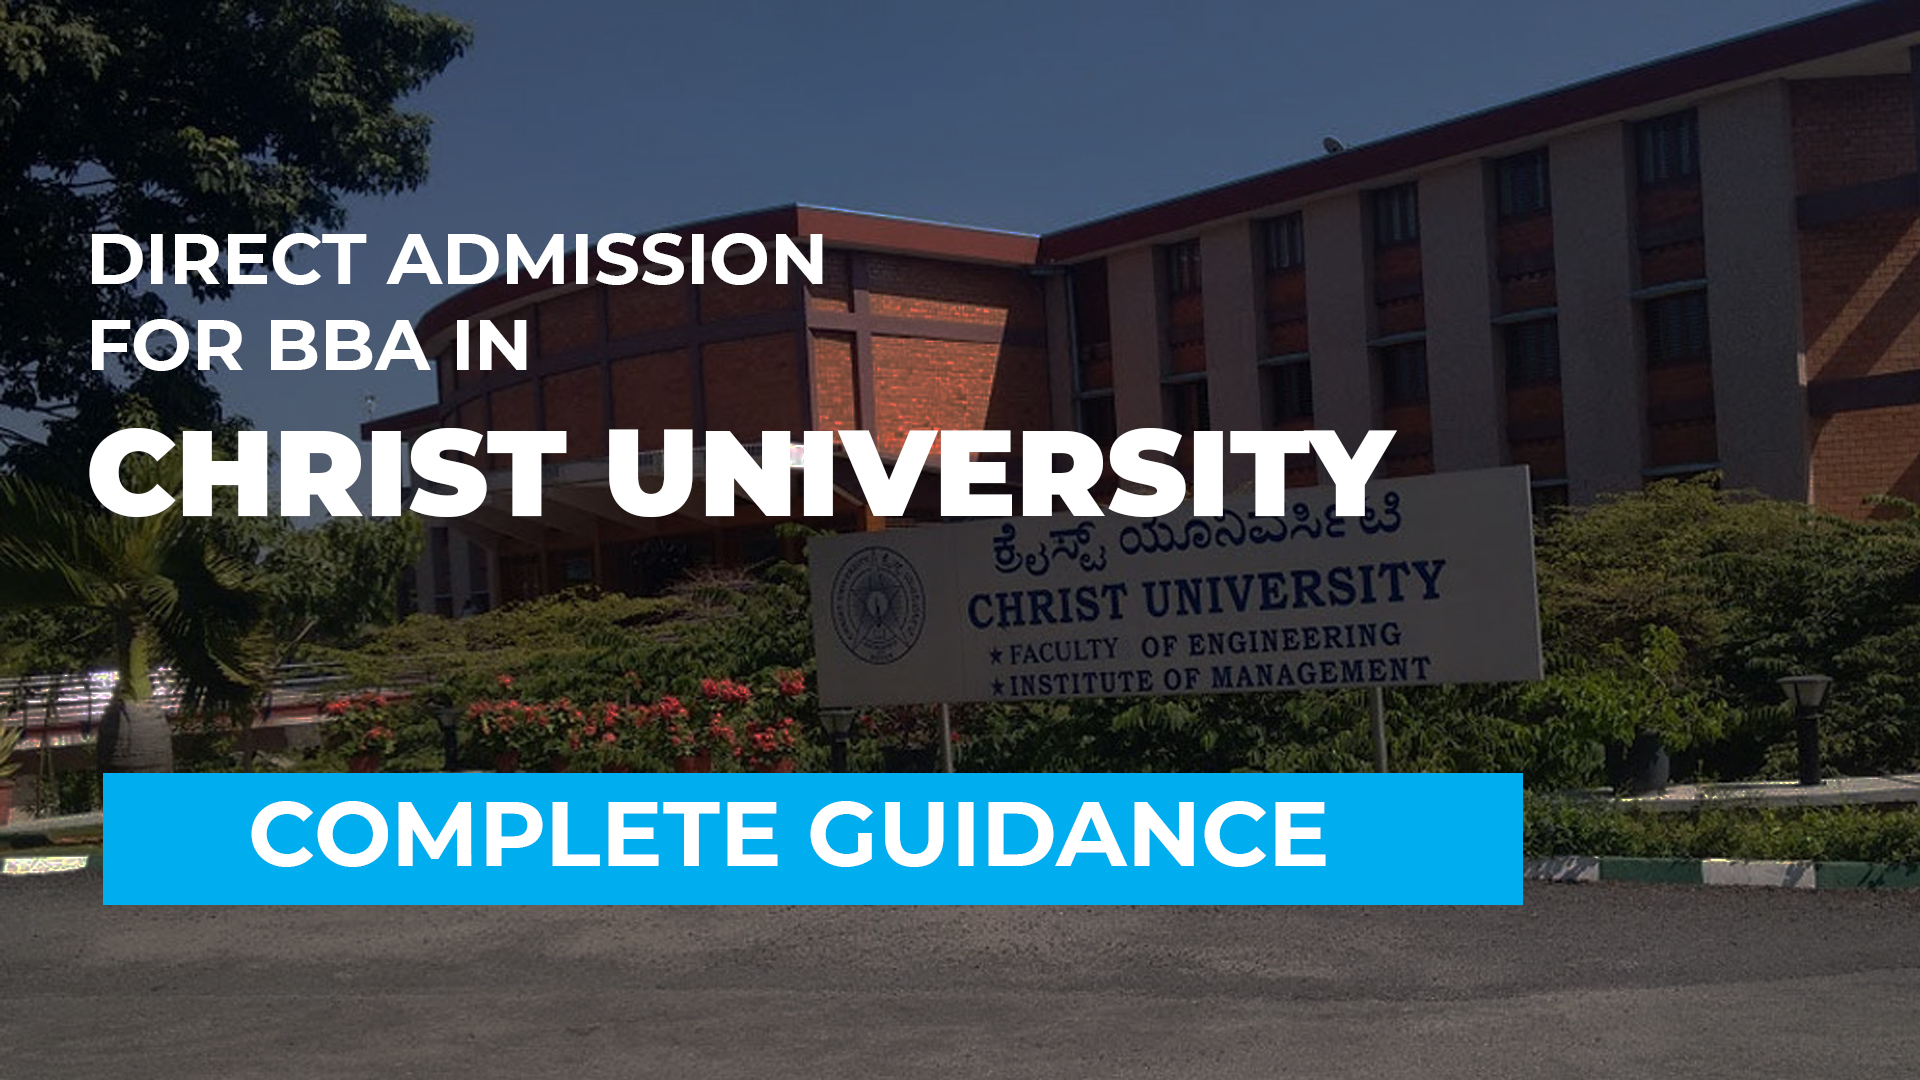 Direct Admission in BBA Christ University